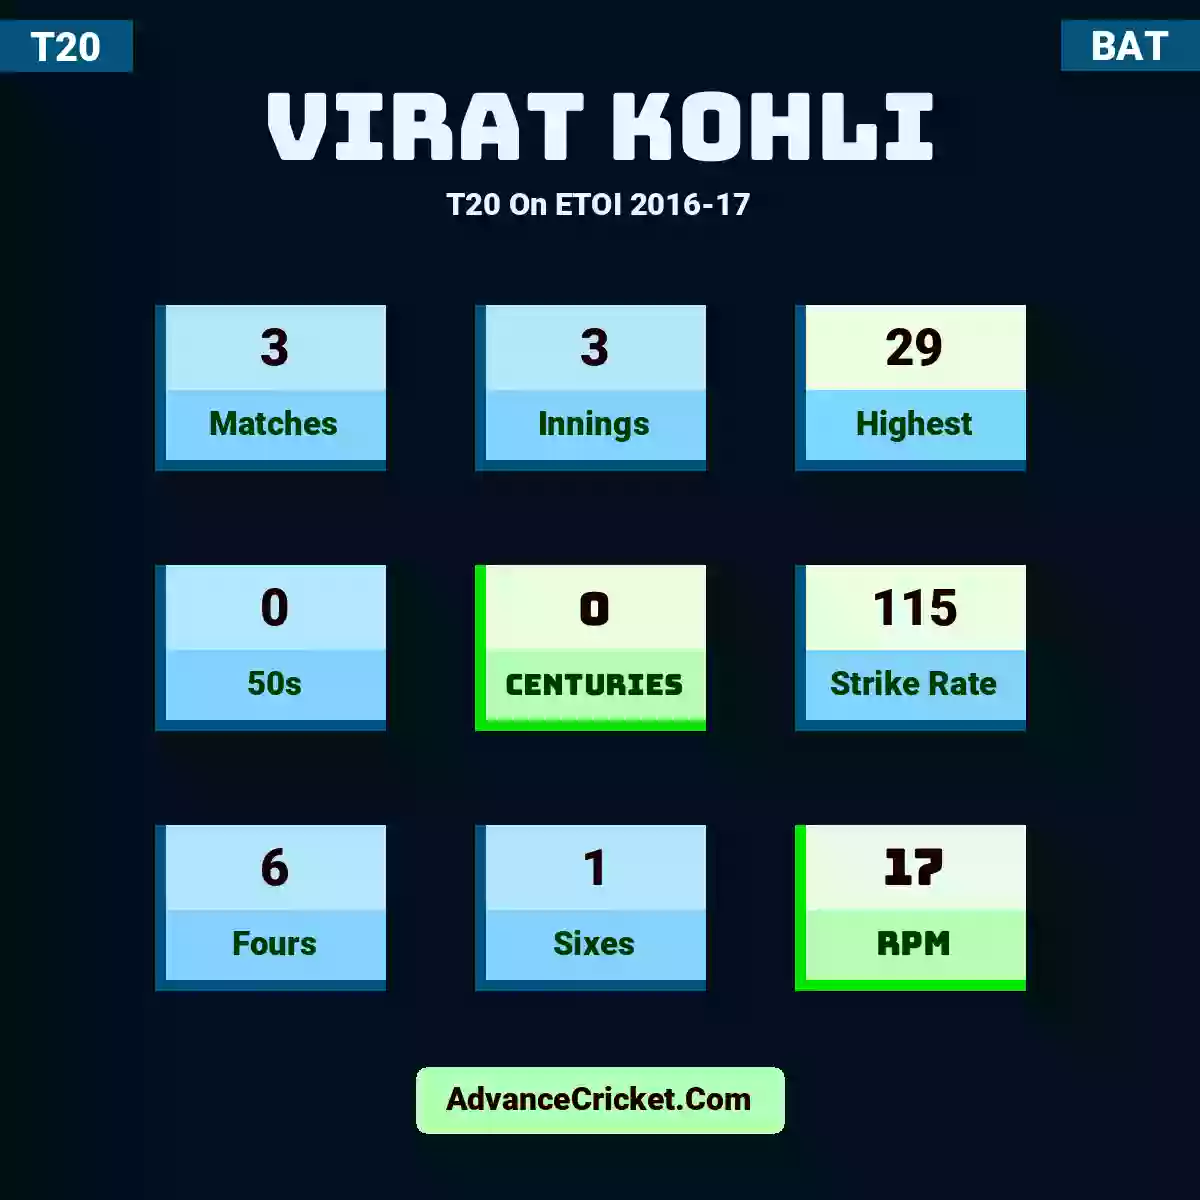 Virat Kohli T20  On ETOI 2016-17, Virat Kohli played 3 matches, scored 29 runs as highest, 0 half-centuries, and 0 centuries, with a strike rate of 115. V.Kohli hit 6 fours and 1 sixes, with an RPM of 17.